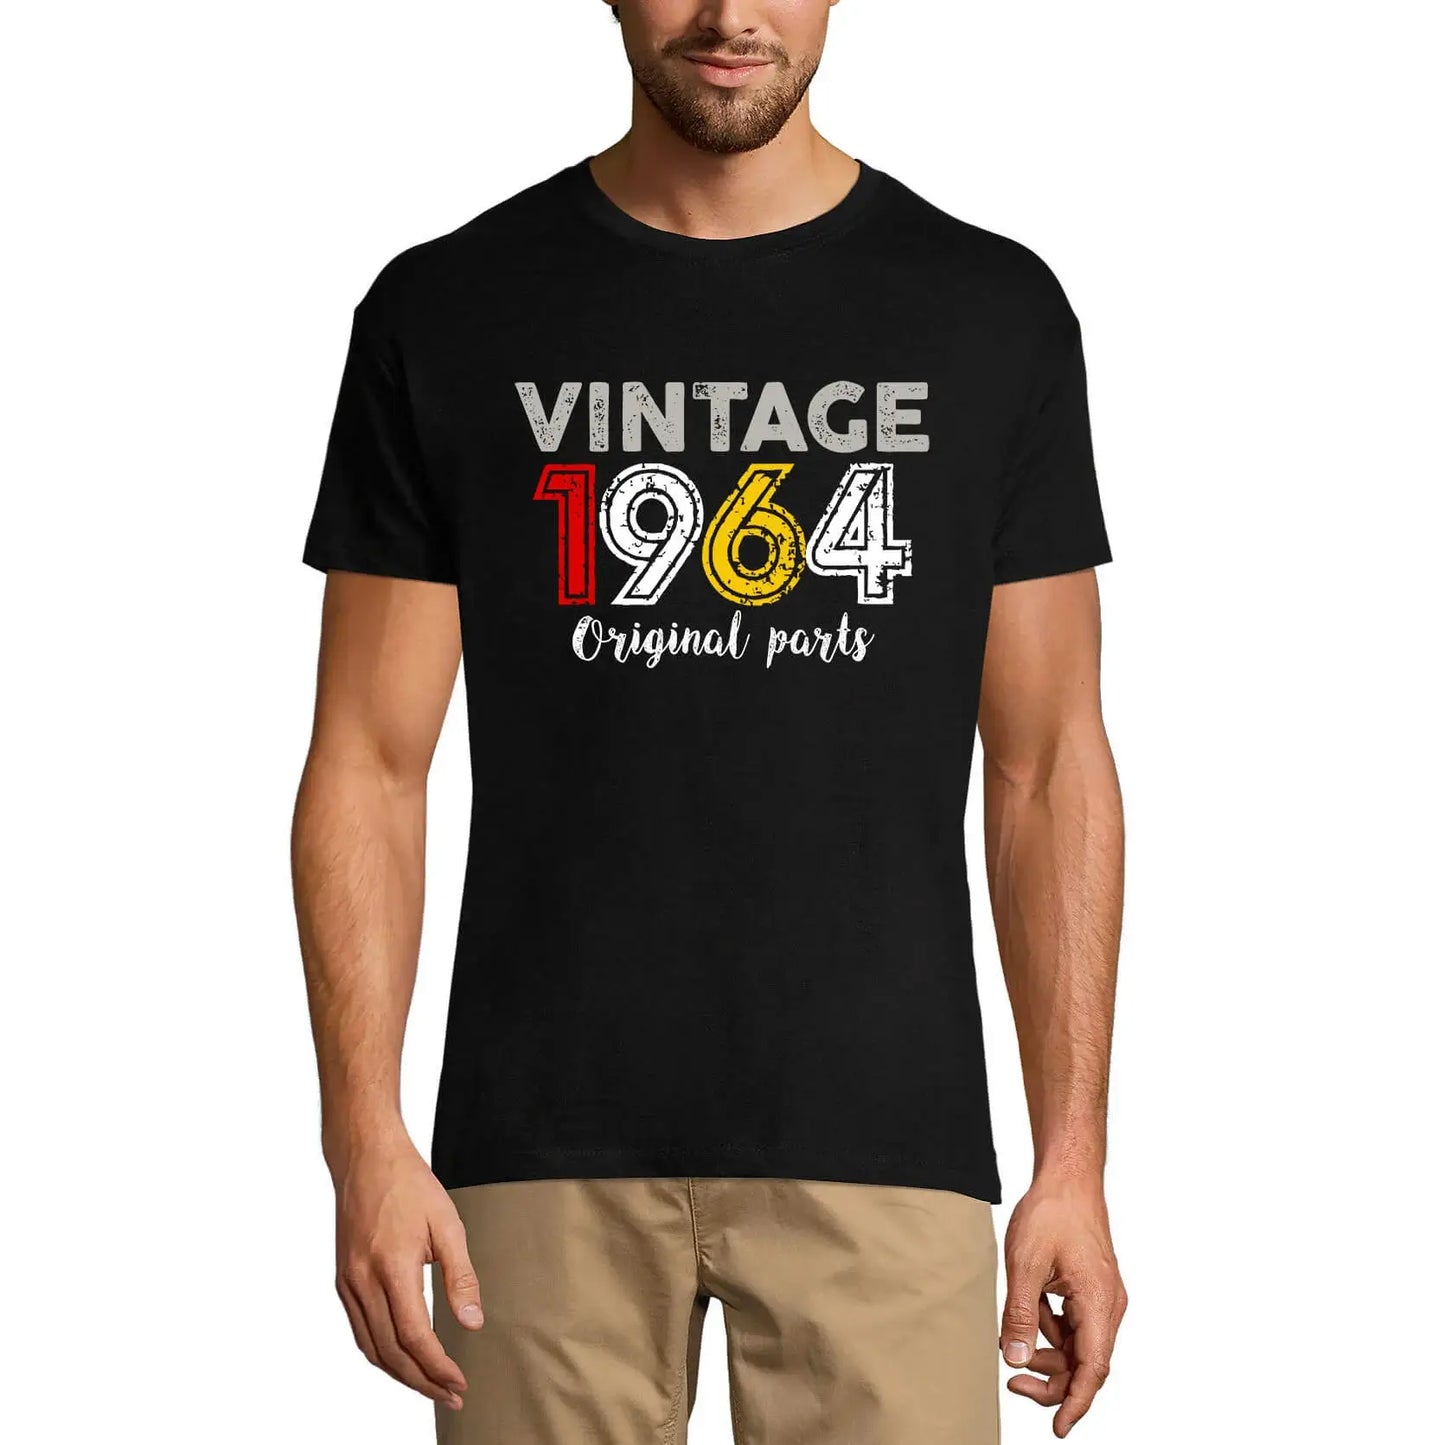 Men's Graphic T-Shirt Original Parts 1964 60th Birthday Anniversary 60 Year Old Gift 1964 Vintage Eco-Friendly Short Sleeve Novelty Tee